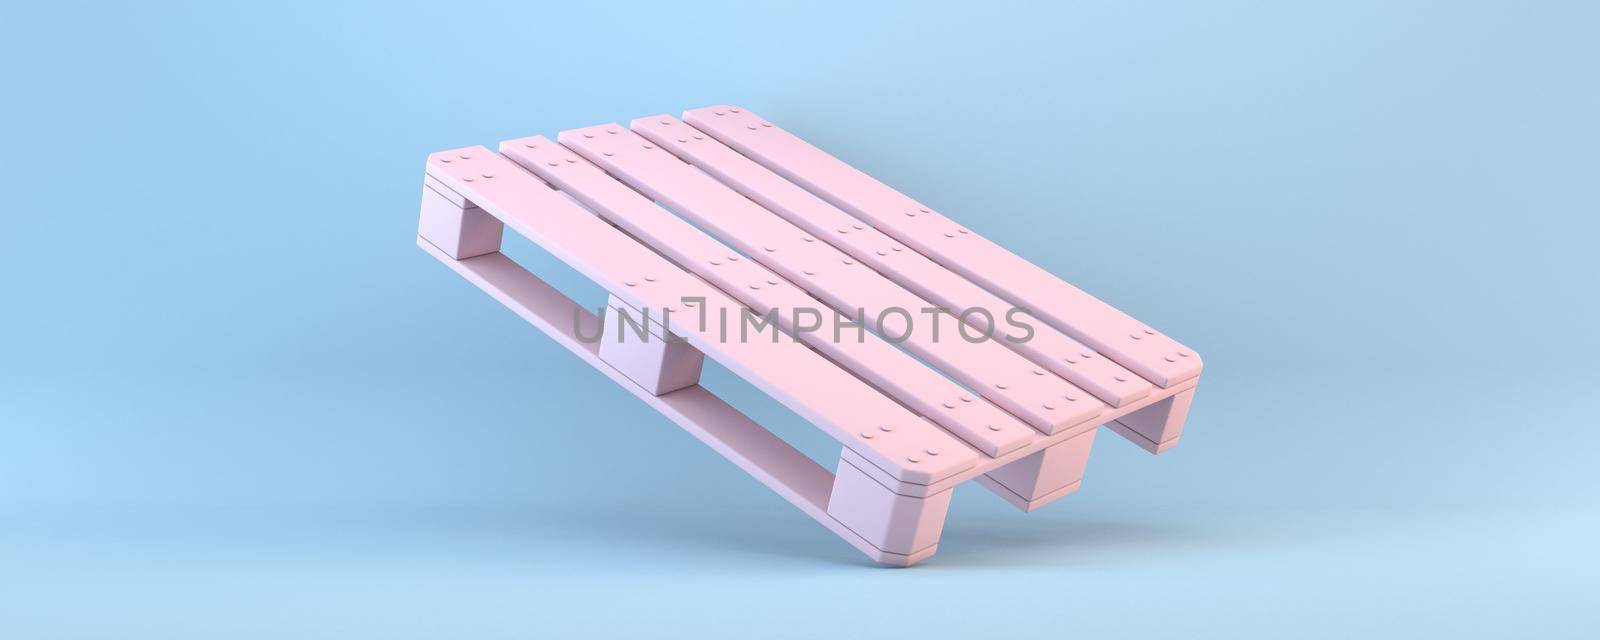 Pink wooden pallet 3D rendering illustration isolated on blue background